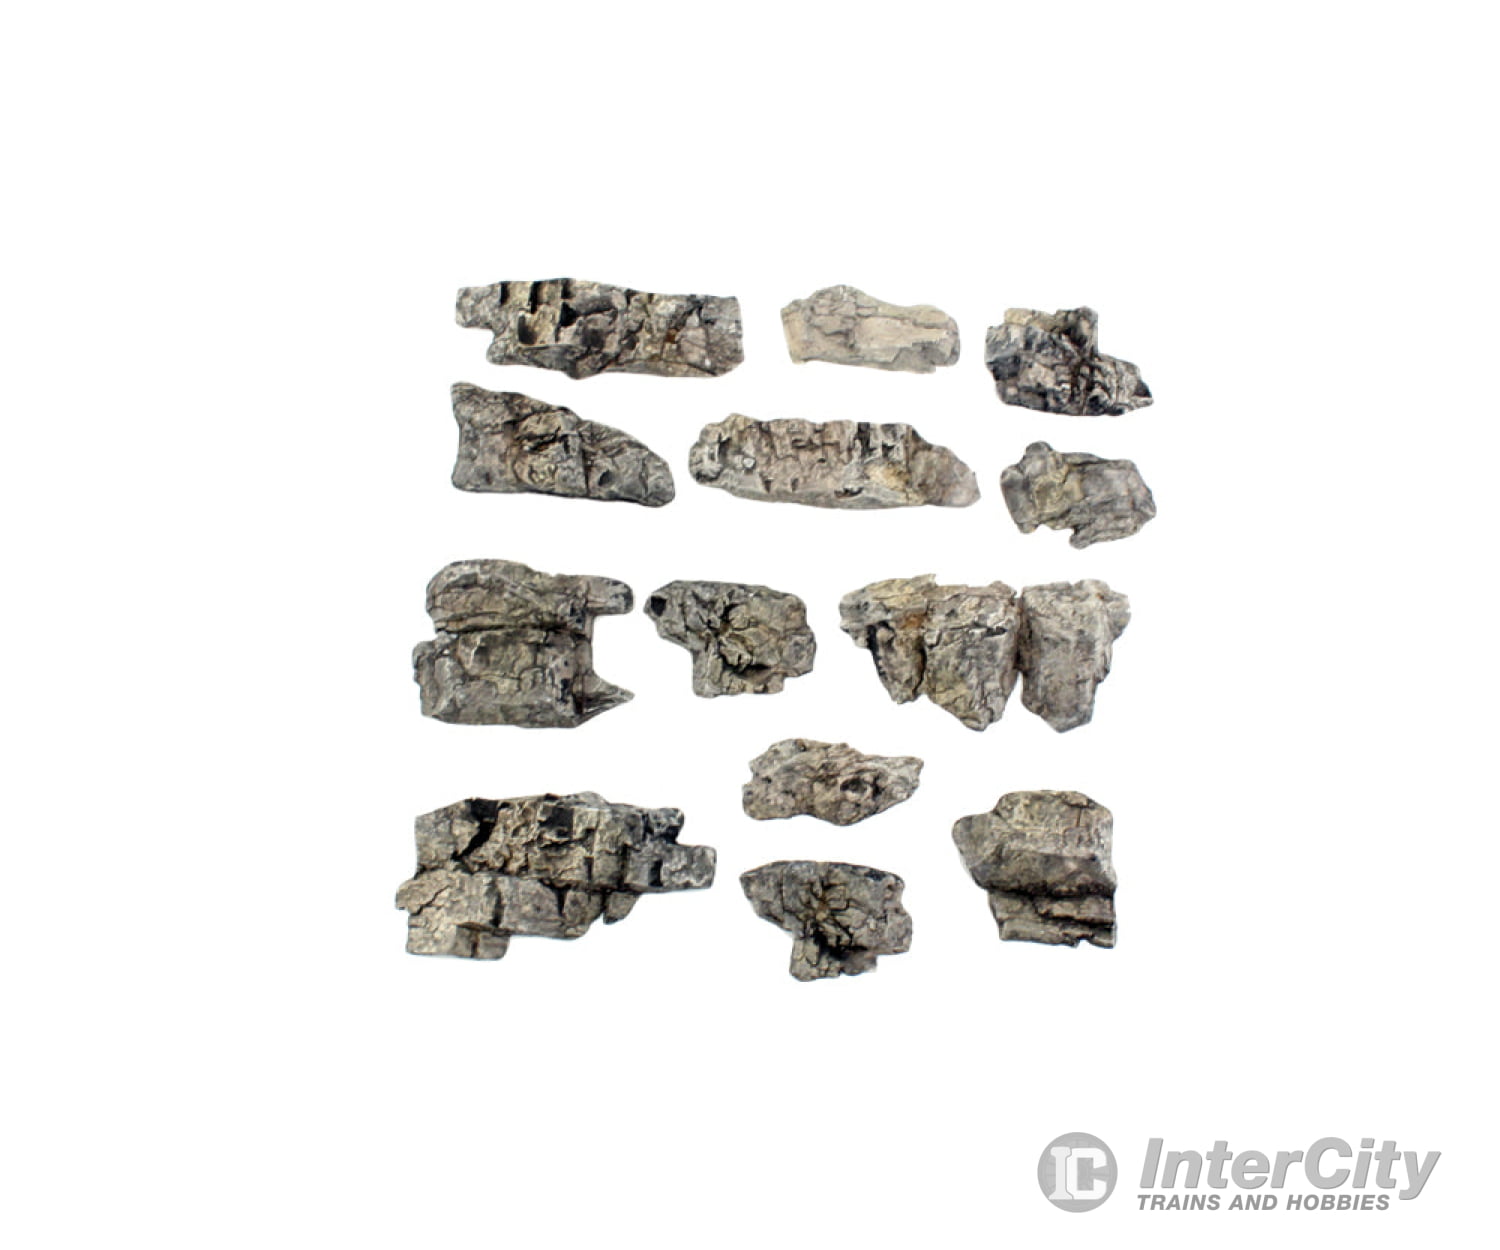 Woodland Scenics 1139 Ready Rocks - Outcropping & Landforms